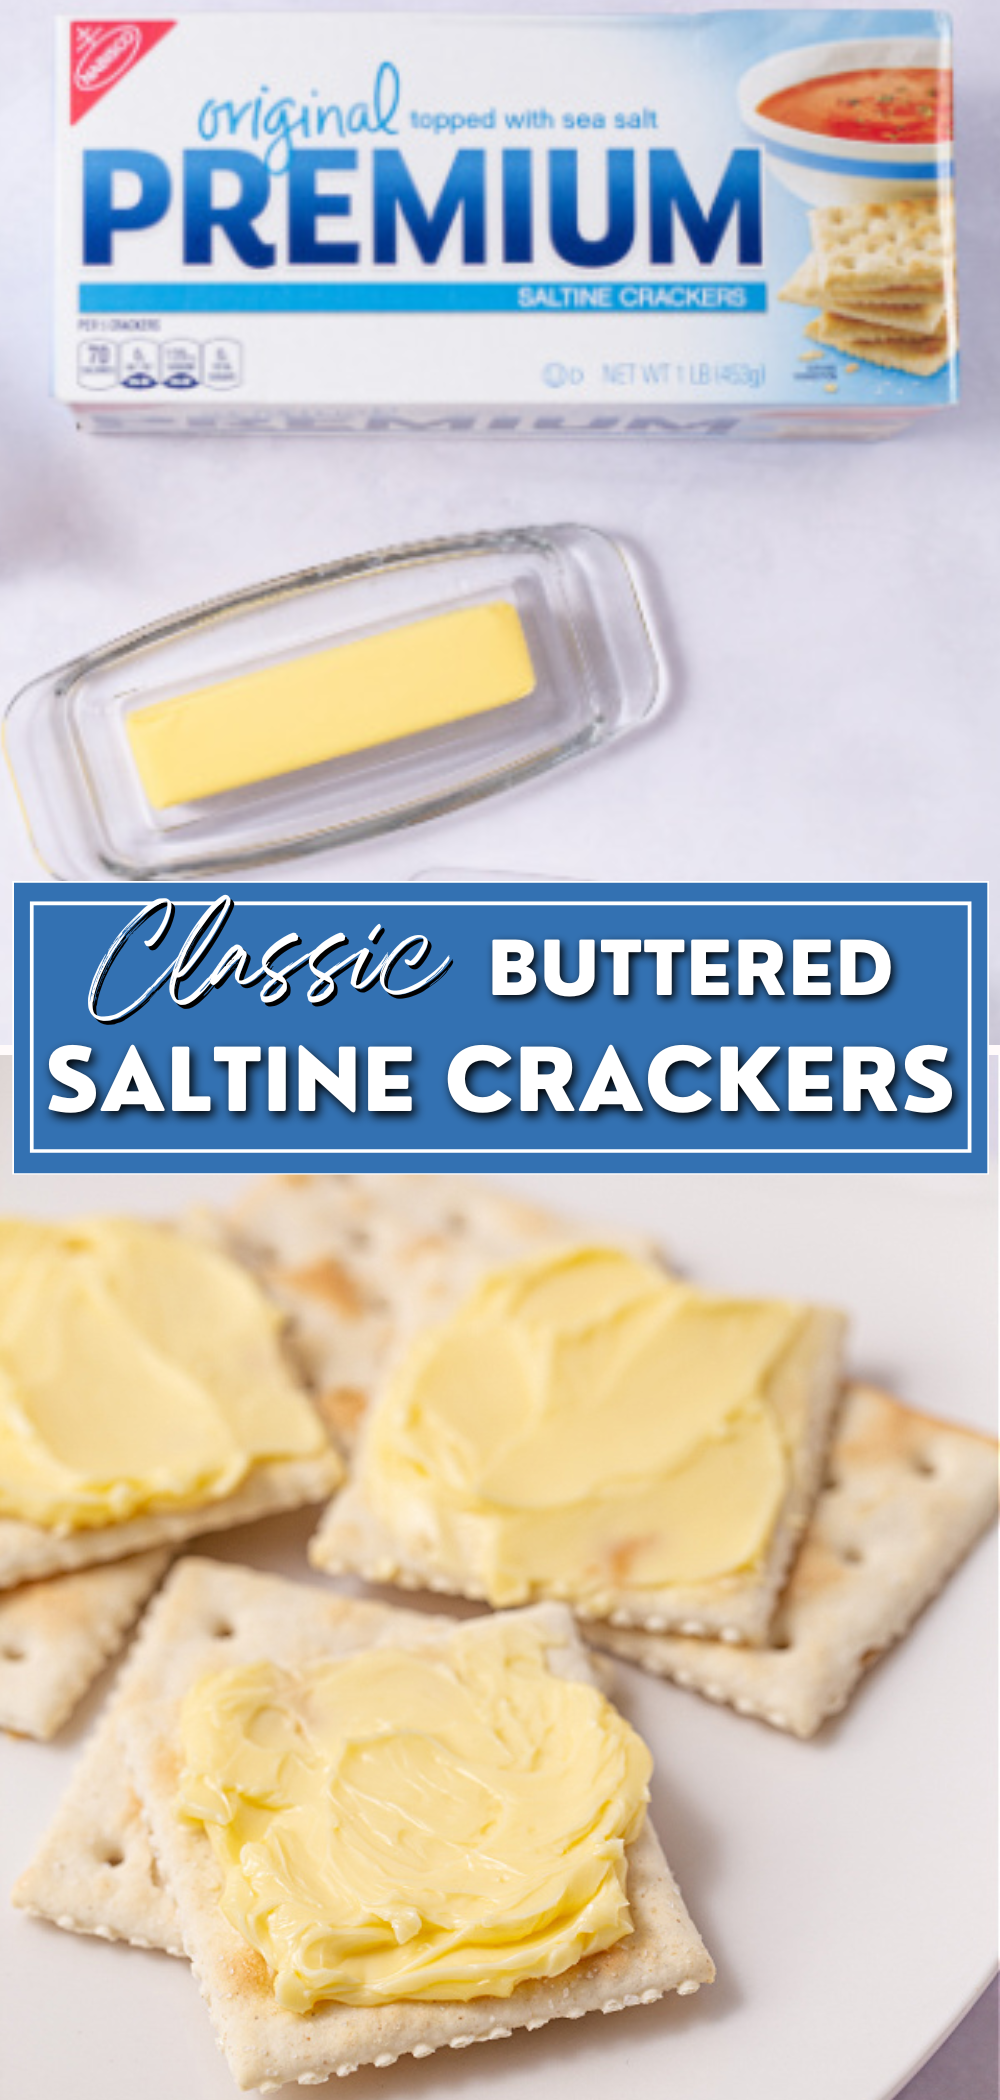 These buttered saltine crackers are a true classic that many of us grew up on. It was the easiest and simplest snack and appetizer recipe for the family, plus budget friendly. Seriously, all you need are two ingredients. It was one of my favorite after school snacks. I hope you enjoy this throwback recipe! What do you like to eat with your saltines? via @skinnydesserts